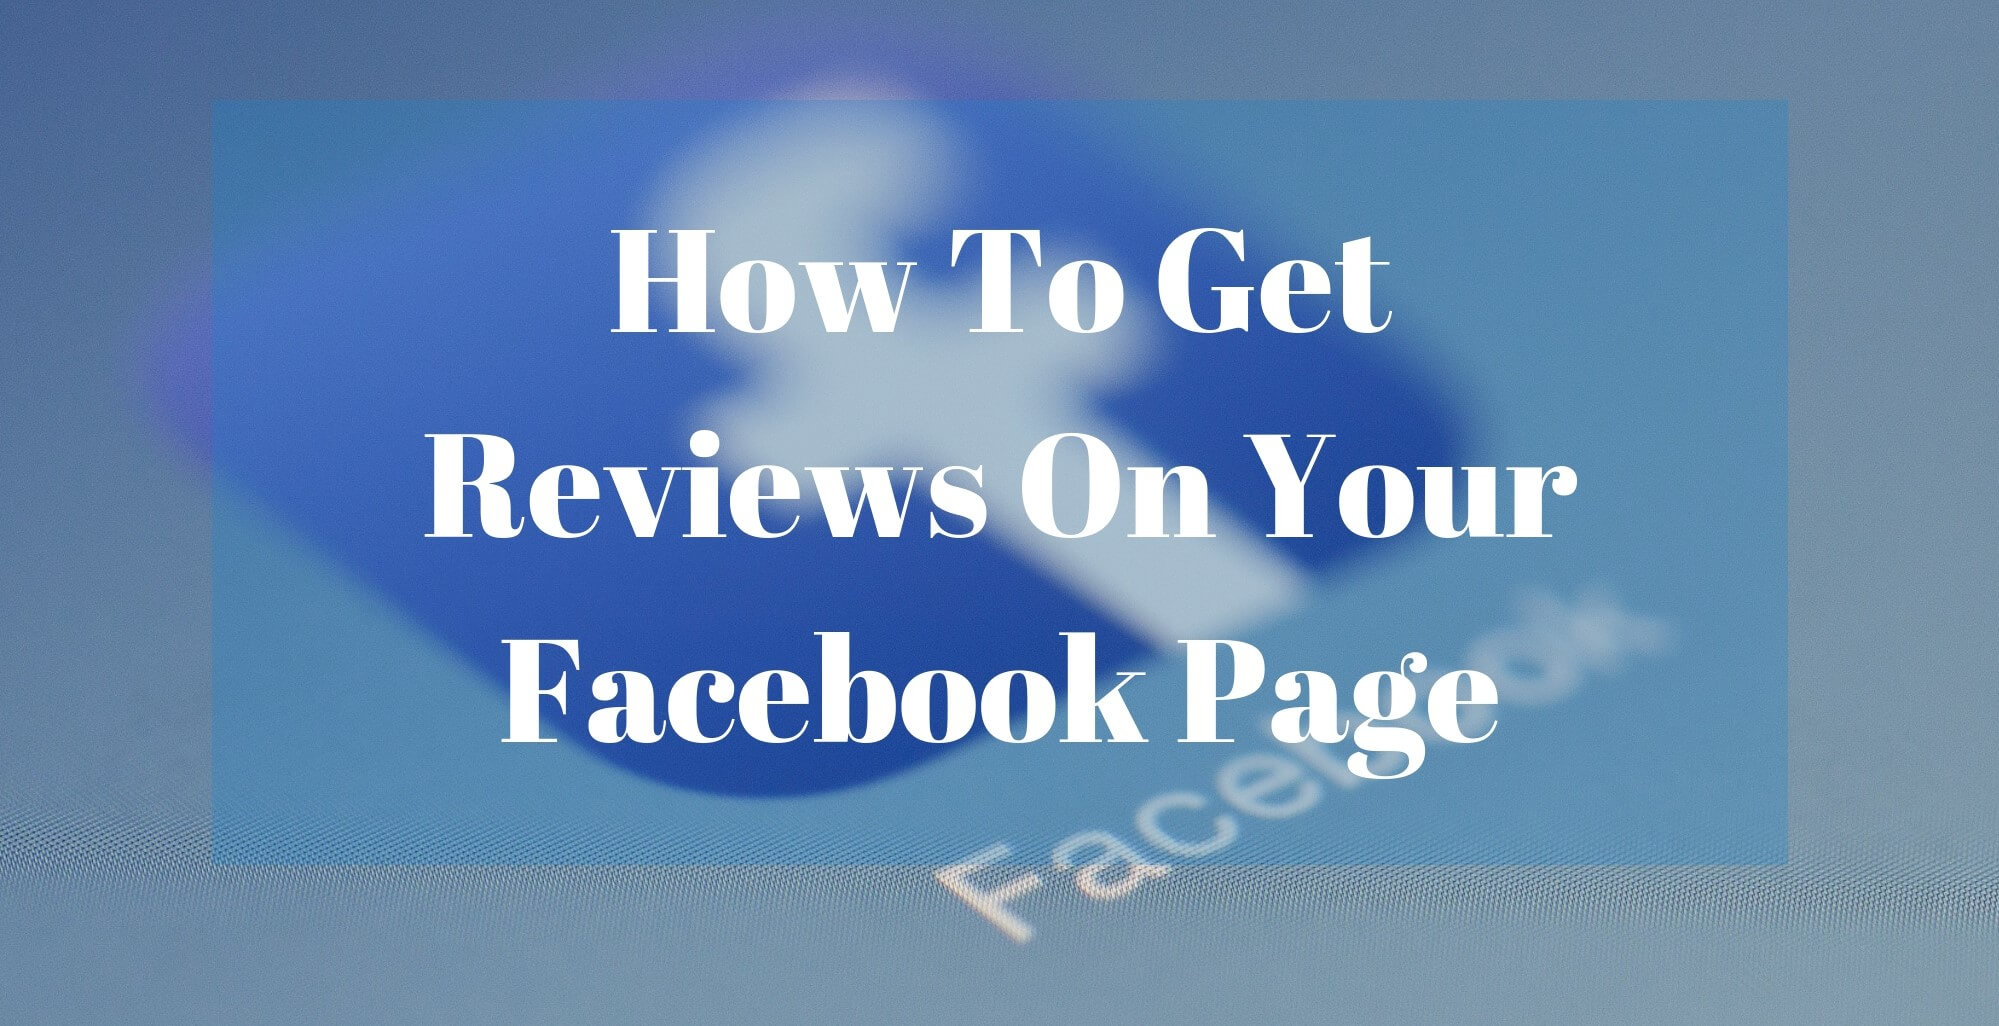 How to get reviews on your Facebook page